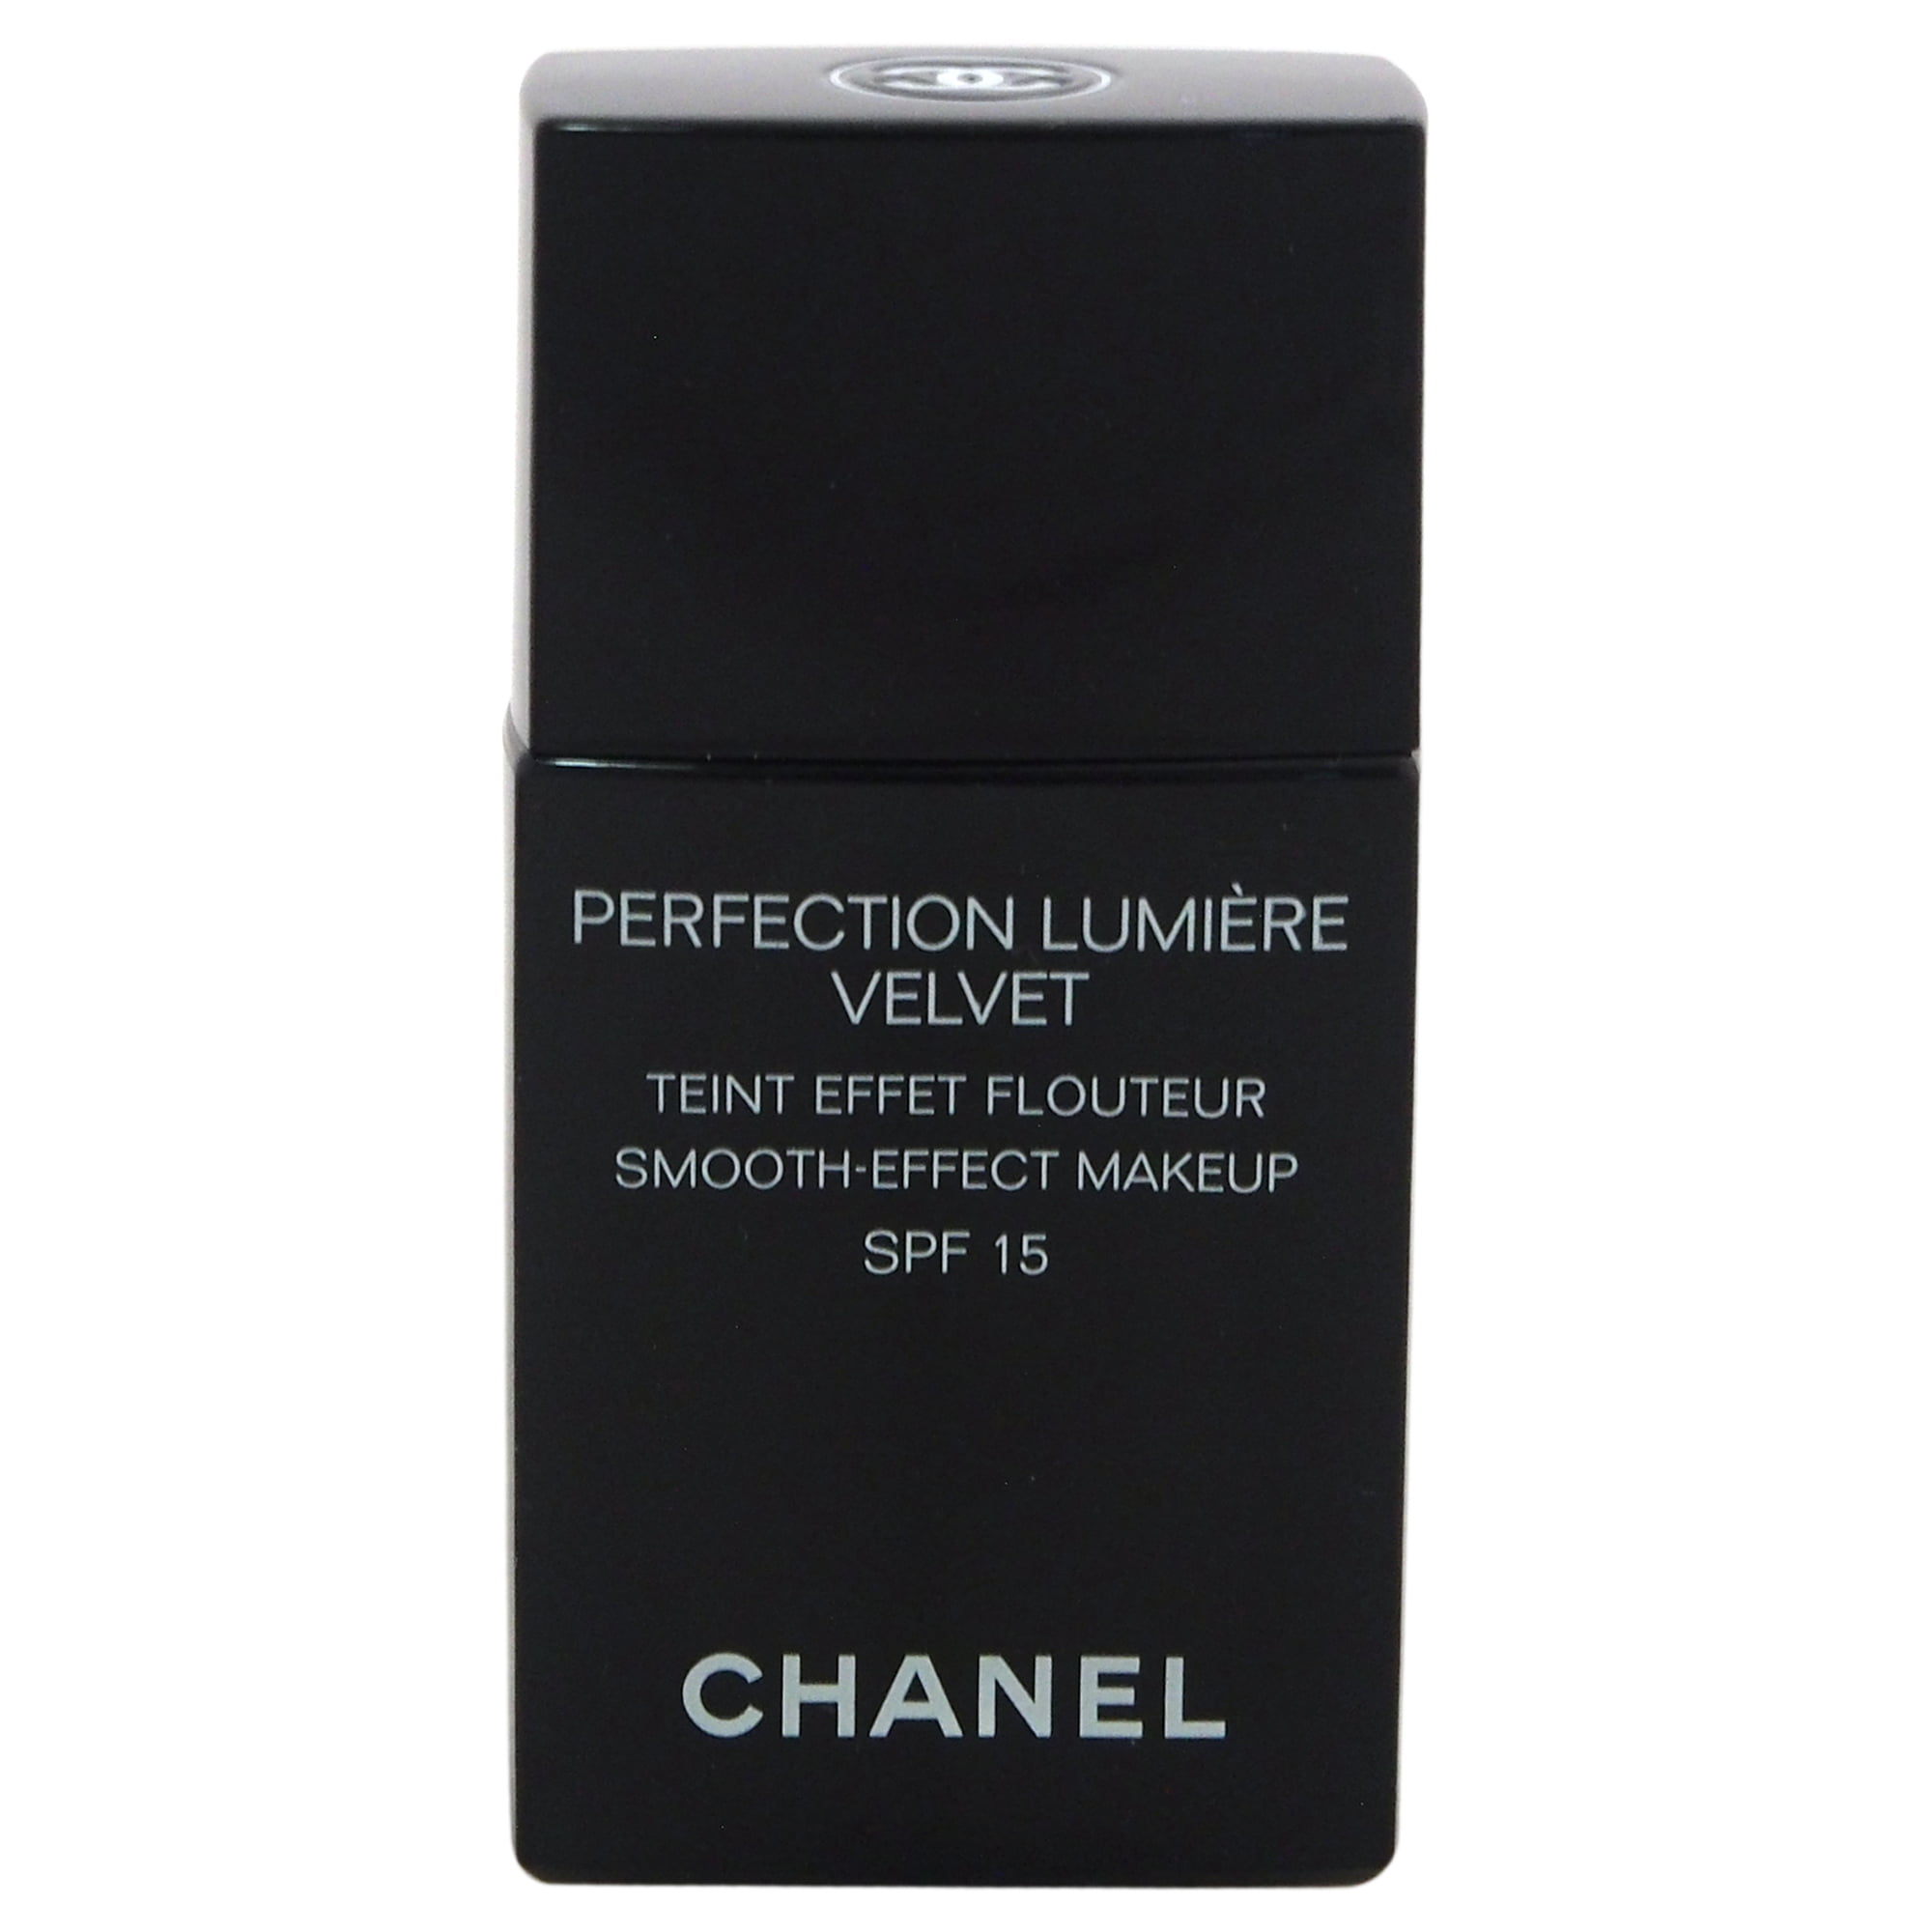 Perfection Lumiere Velvet SPF 15 - # 20 Beige by Chanel for Women - 1.01 oz  Foundation